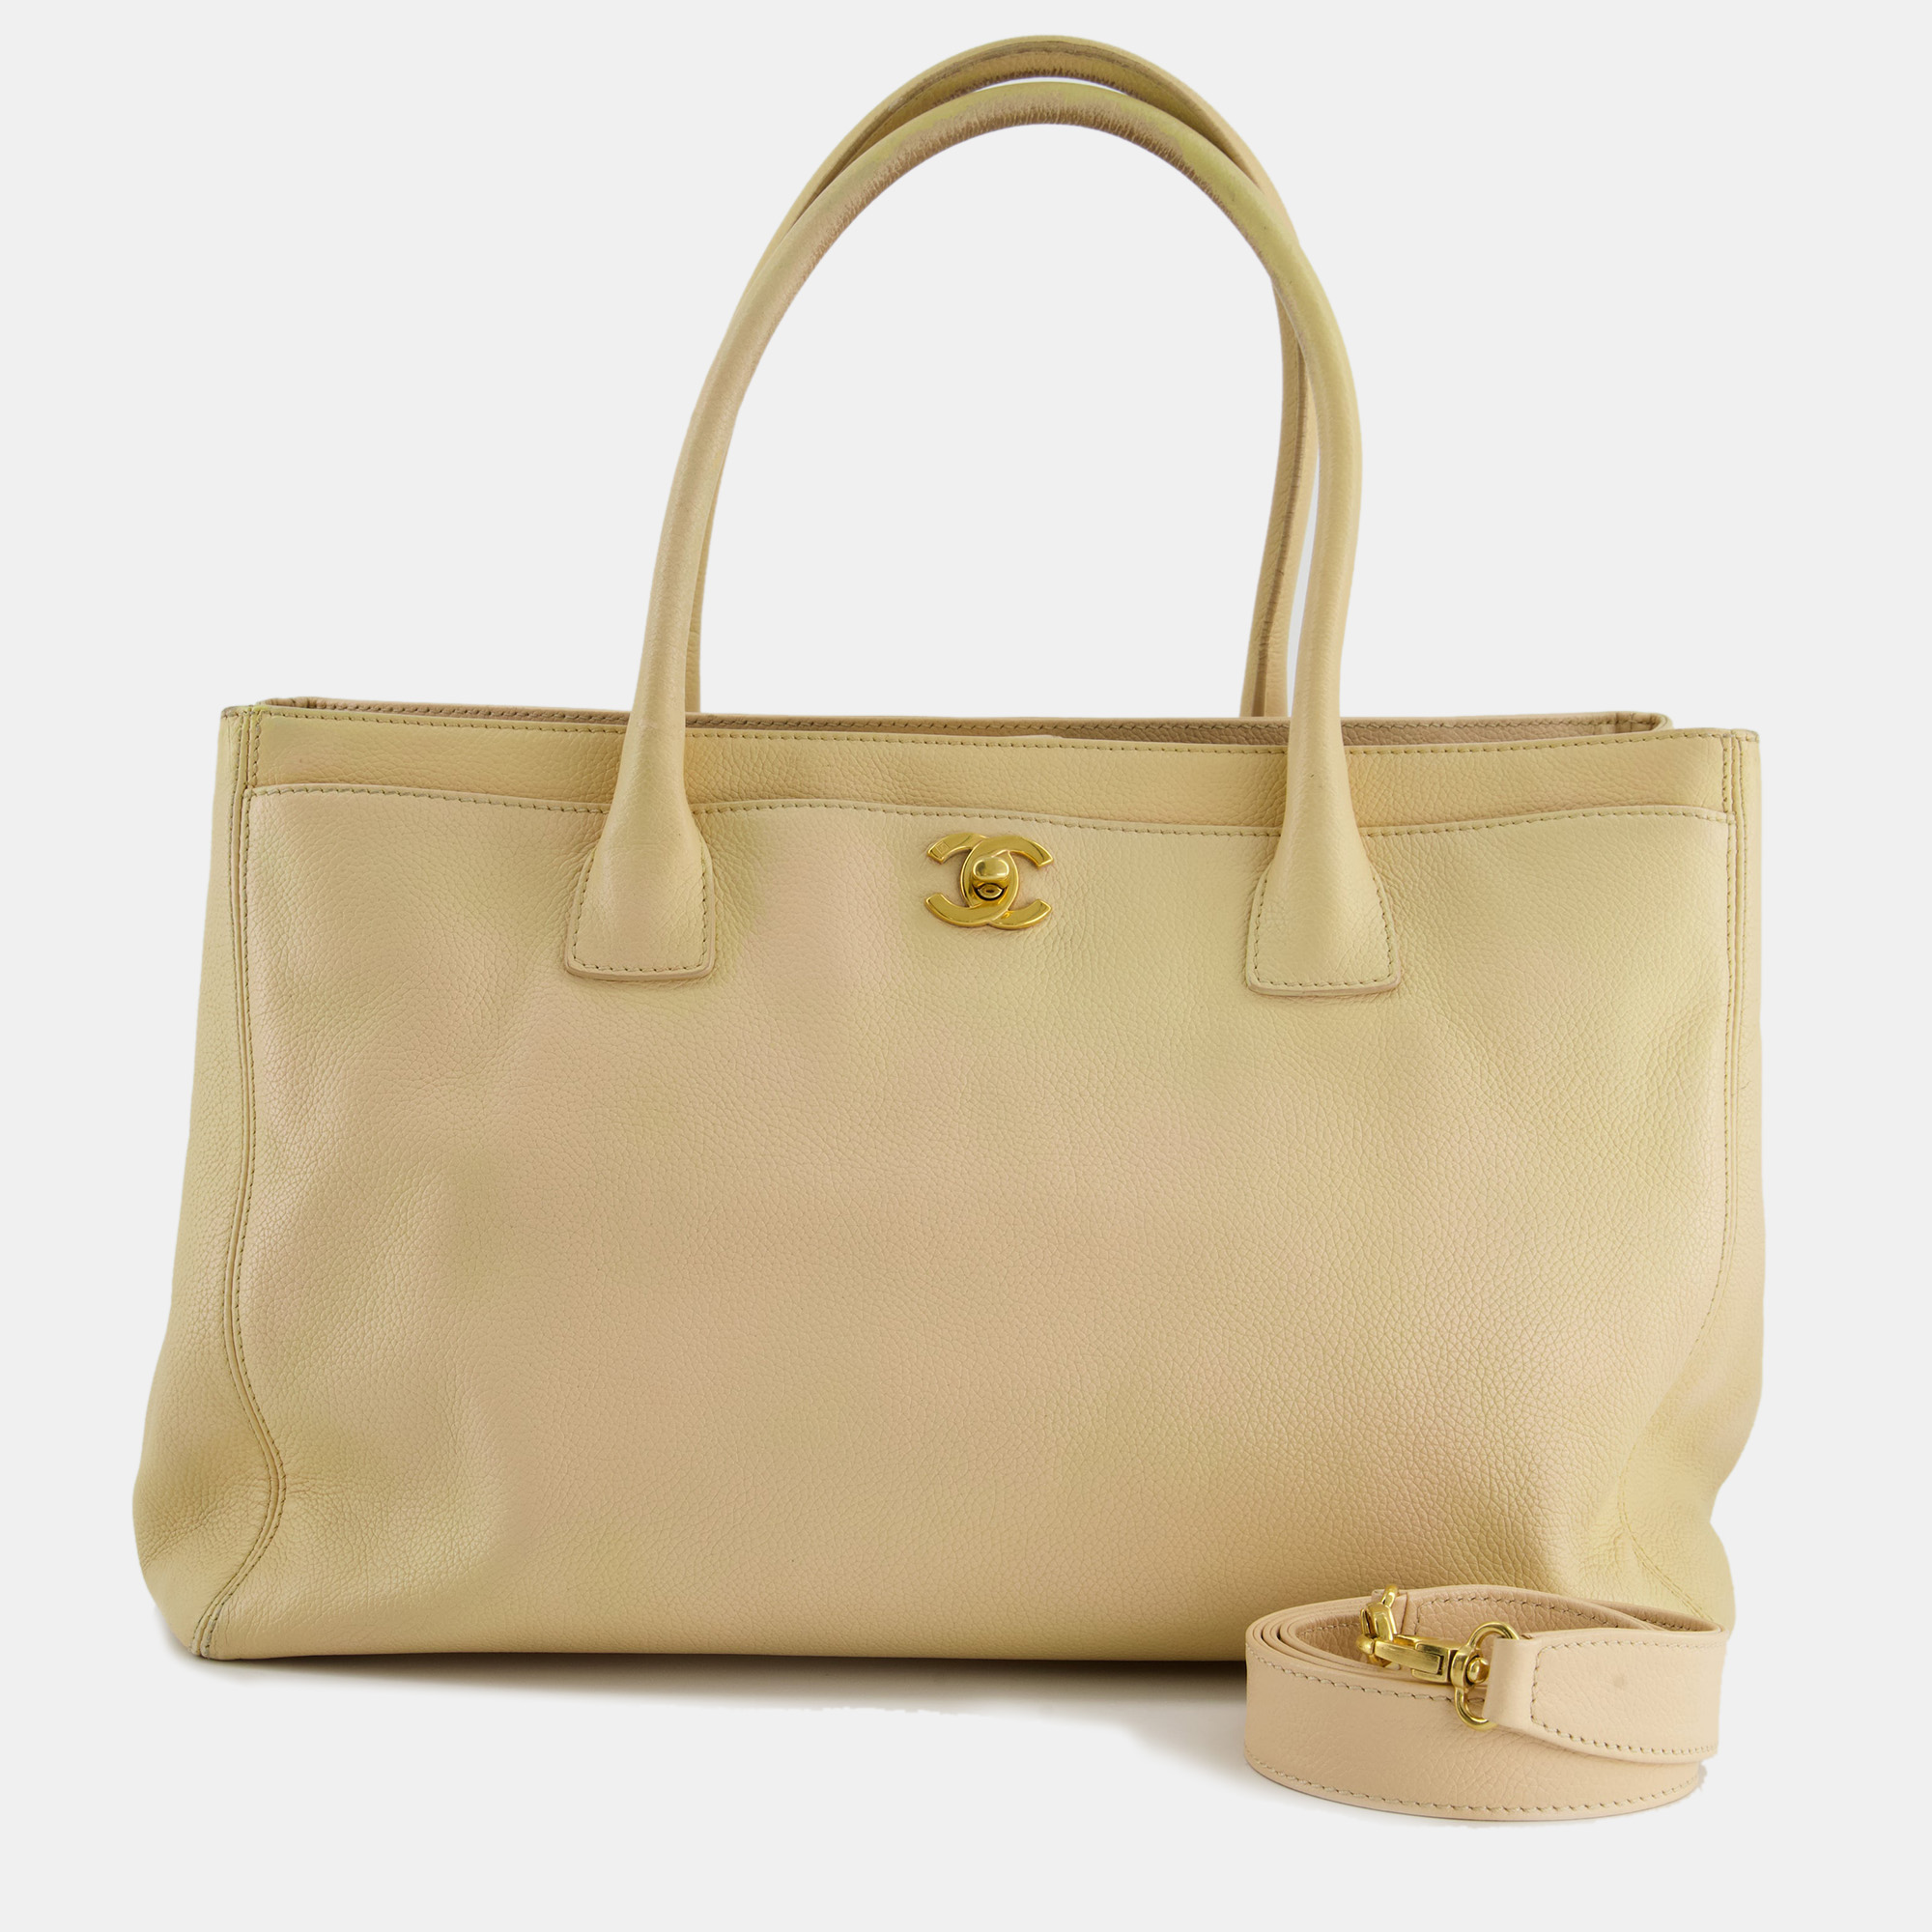 Chanel vintage beige executive tote bag in leather with 24k gold hardware